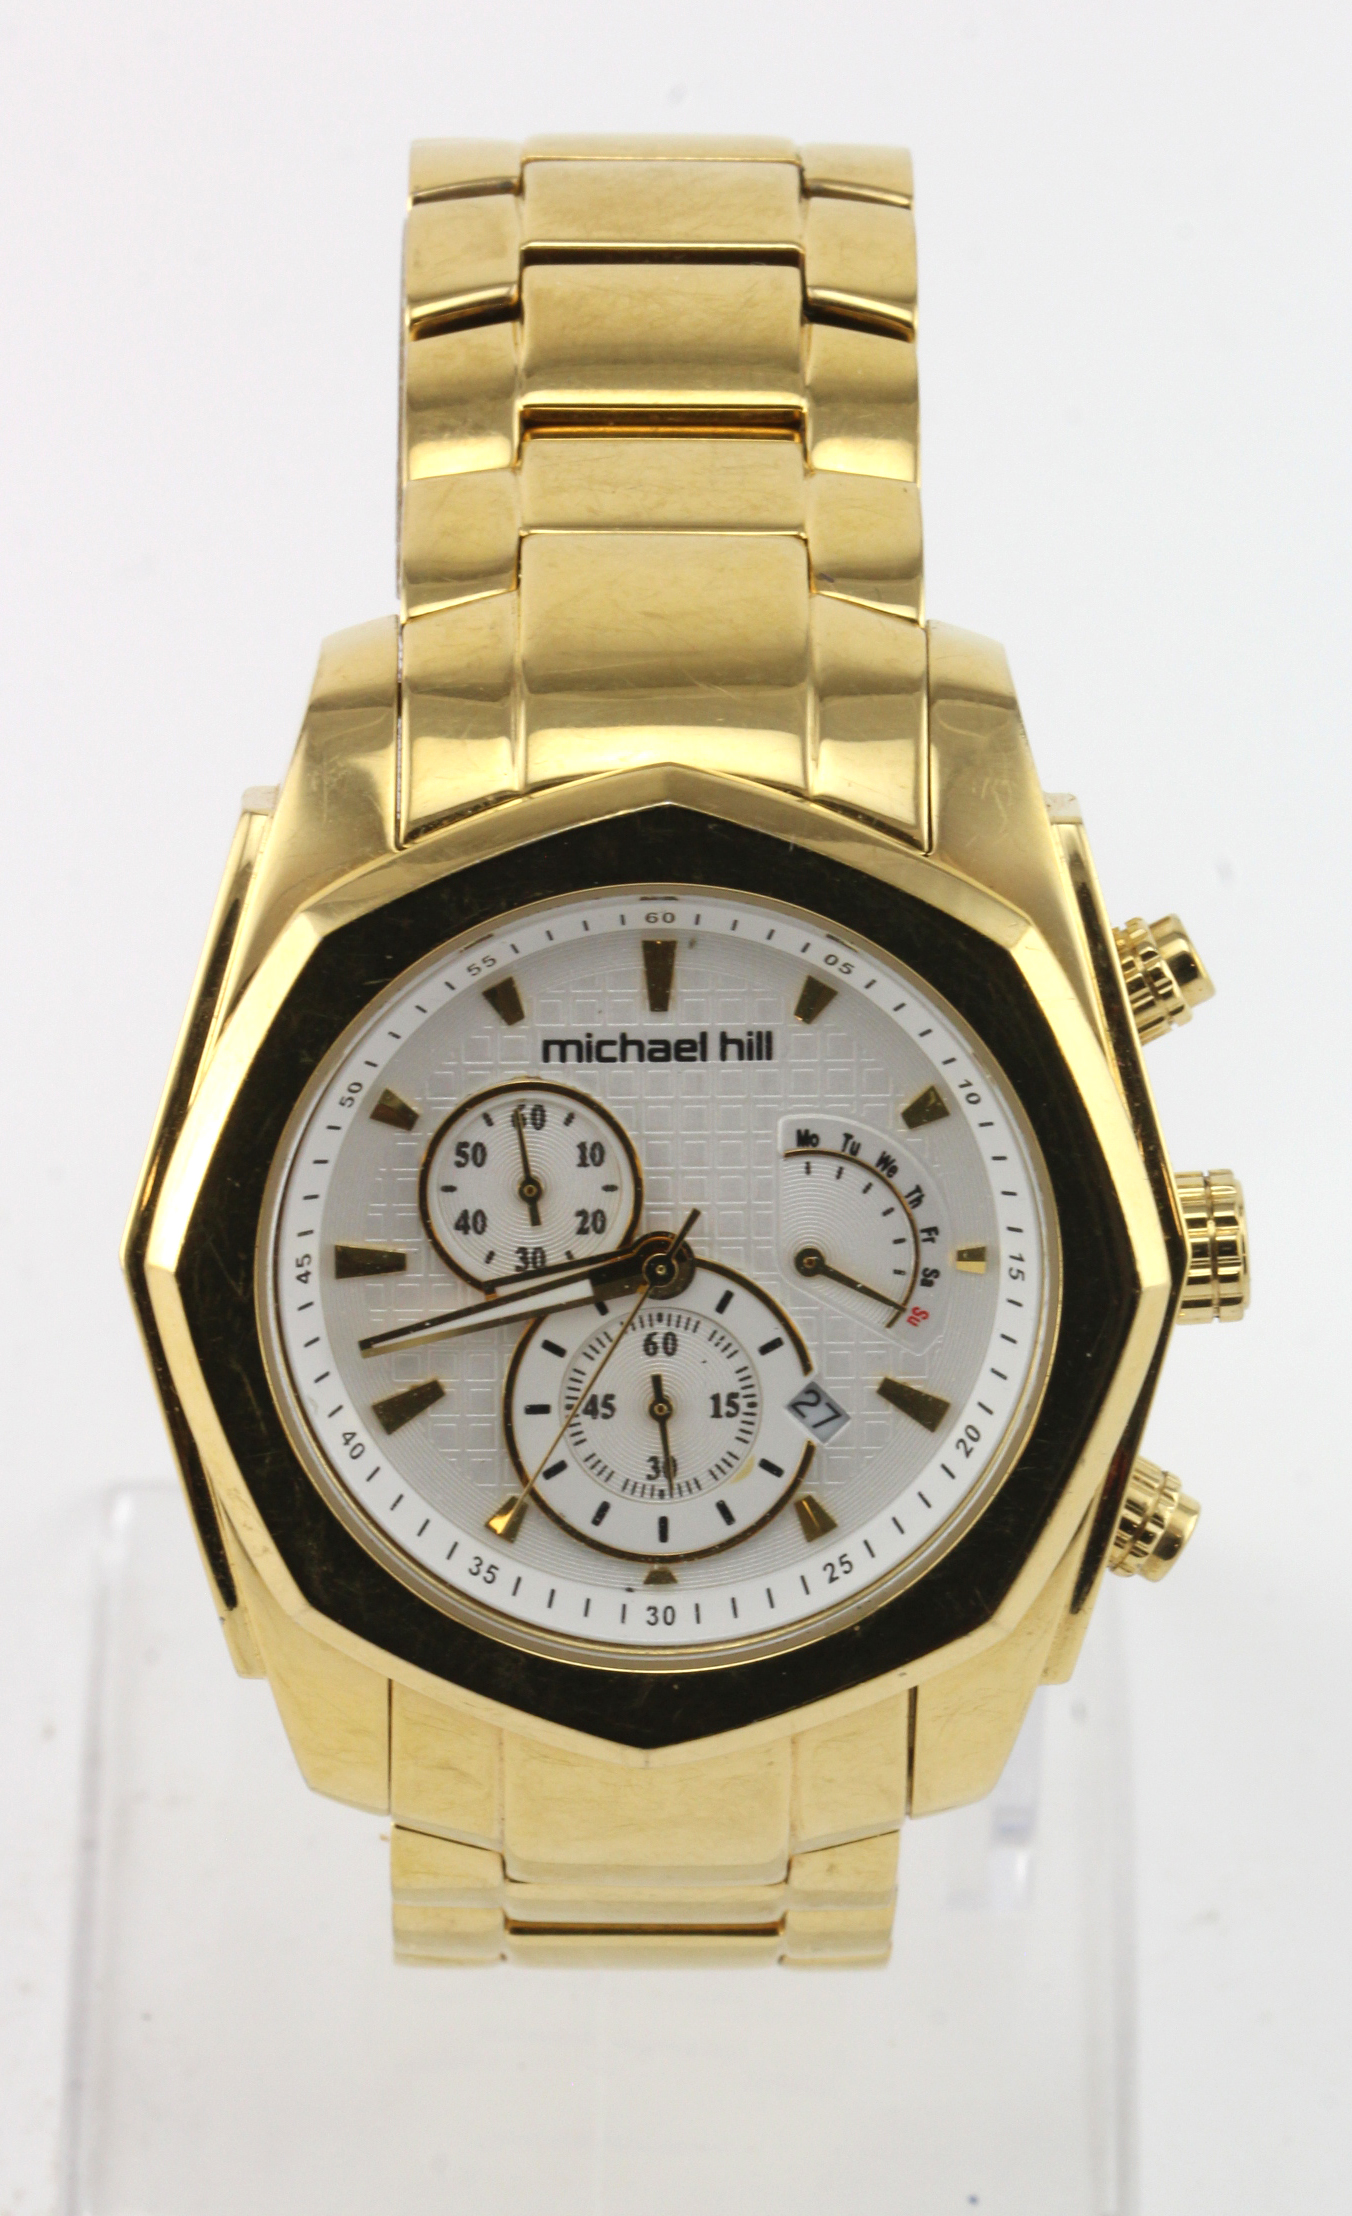 Gents "Michael Hill" Chronograph wristwatch In Gold Tone Stainless Steel. Working when catalogued